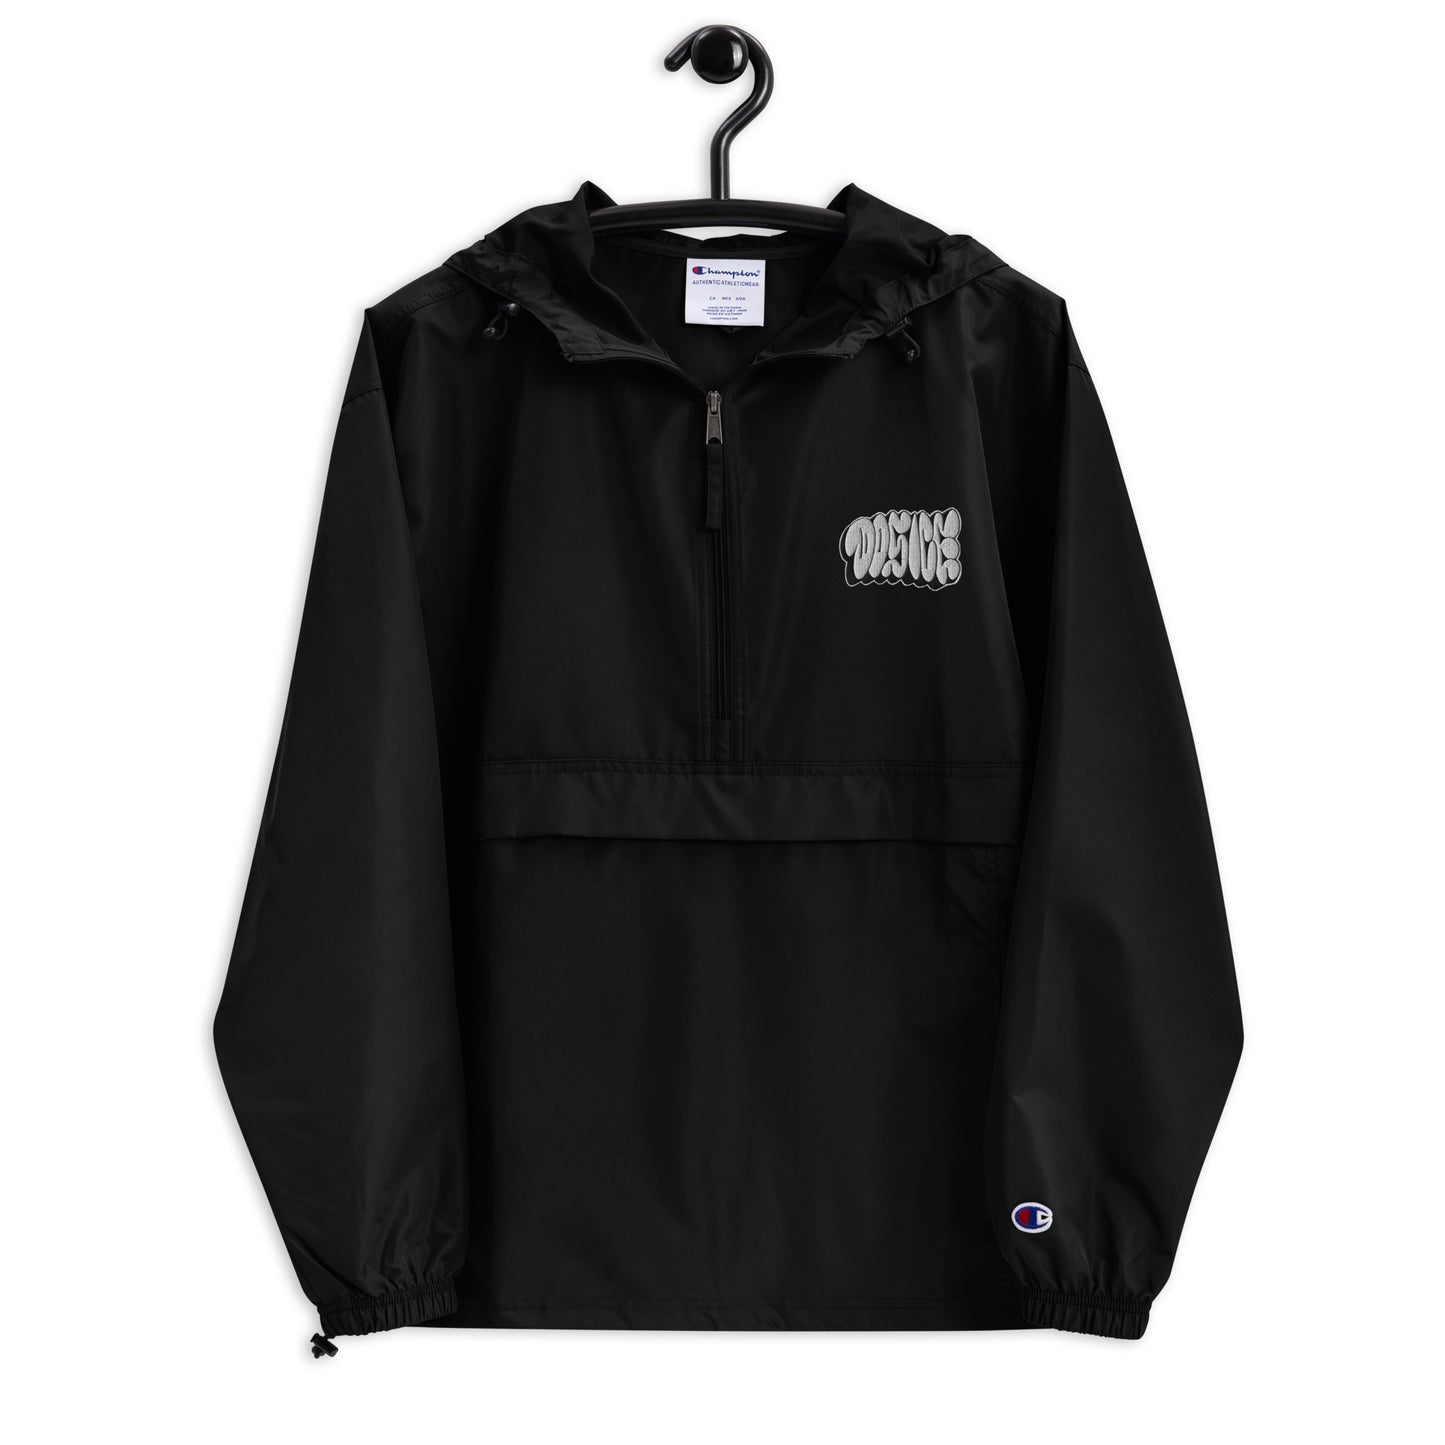 Dosice Embroidered Champion Jacket